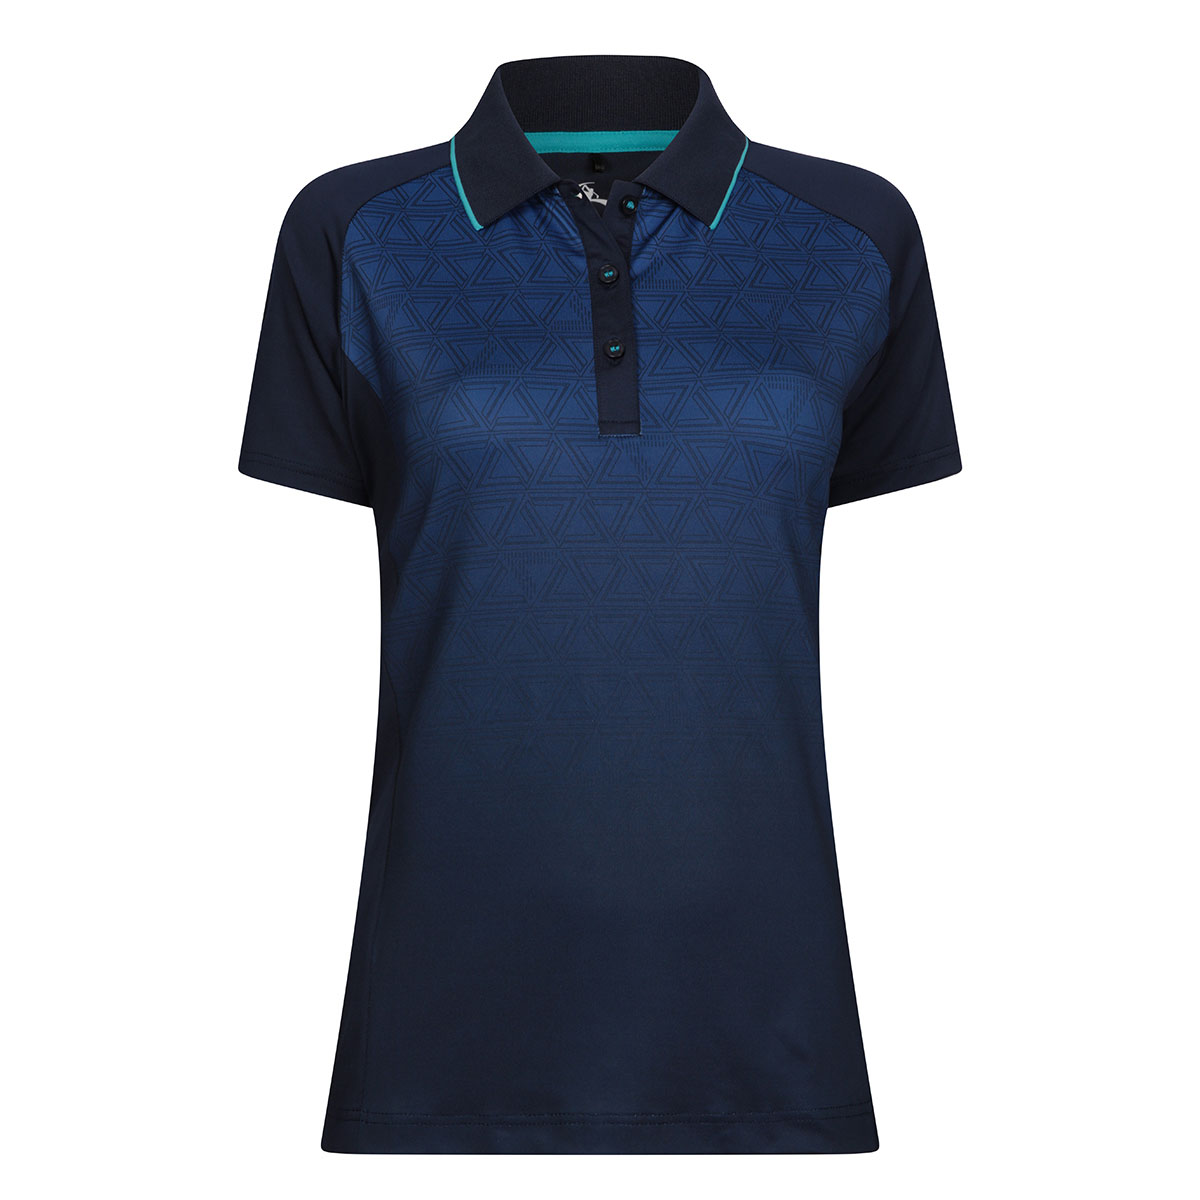 Stromberg Ladies Missy Golf Polo Shirt from american golf